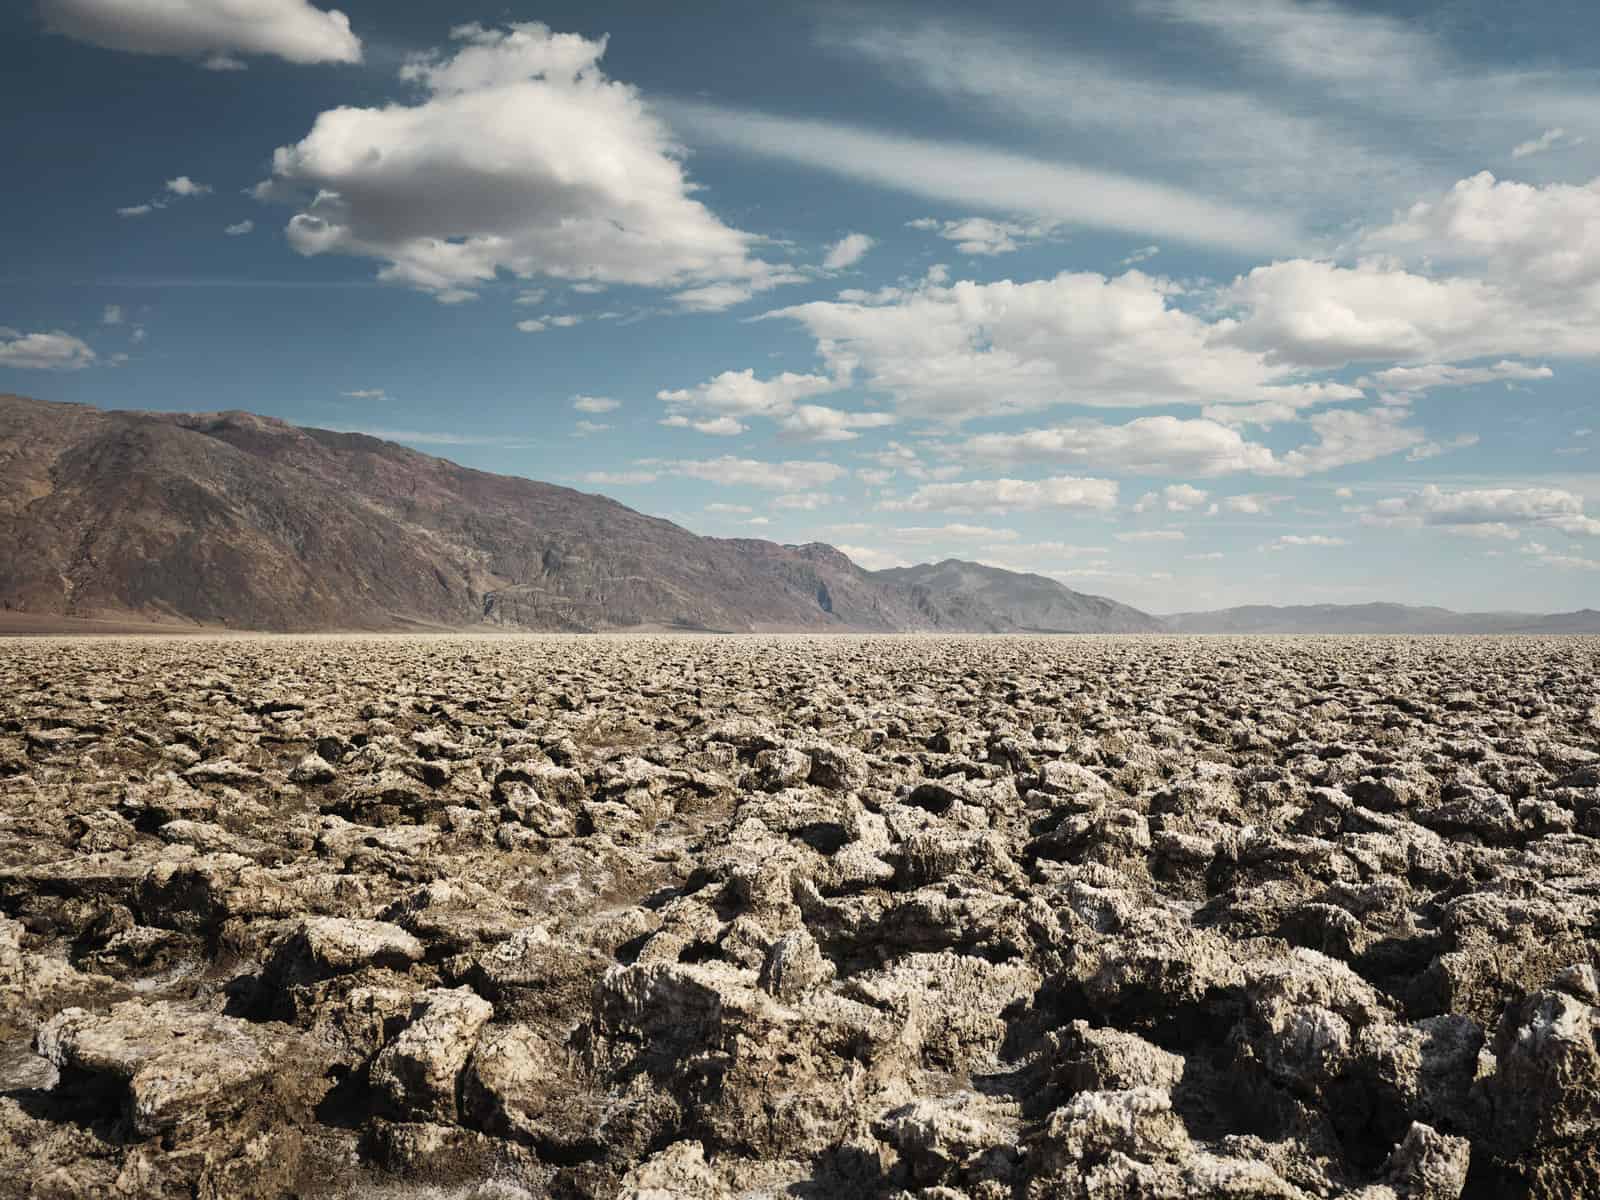 The image from Death Valley that inspired our further adventure planning. ID: A landscape image. In the foreground are rocks which are brown and sandy. In the background are desert mountains in reddy browns. The sky is blue with a few white clouds.